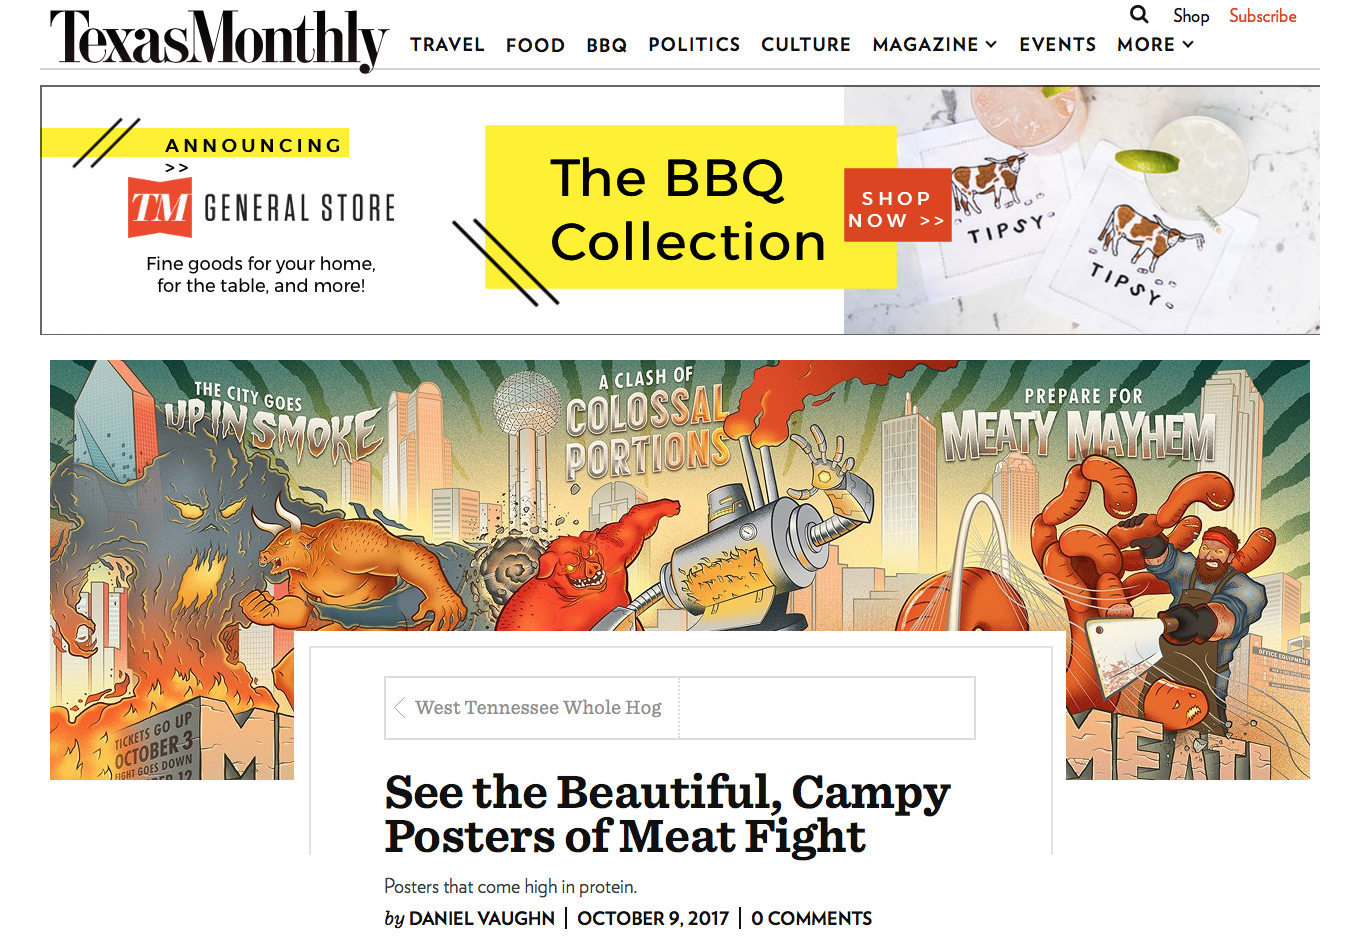 Recognizing Greatness and Meatness in Texas Monthly